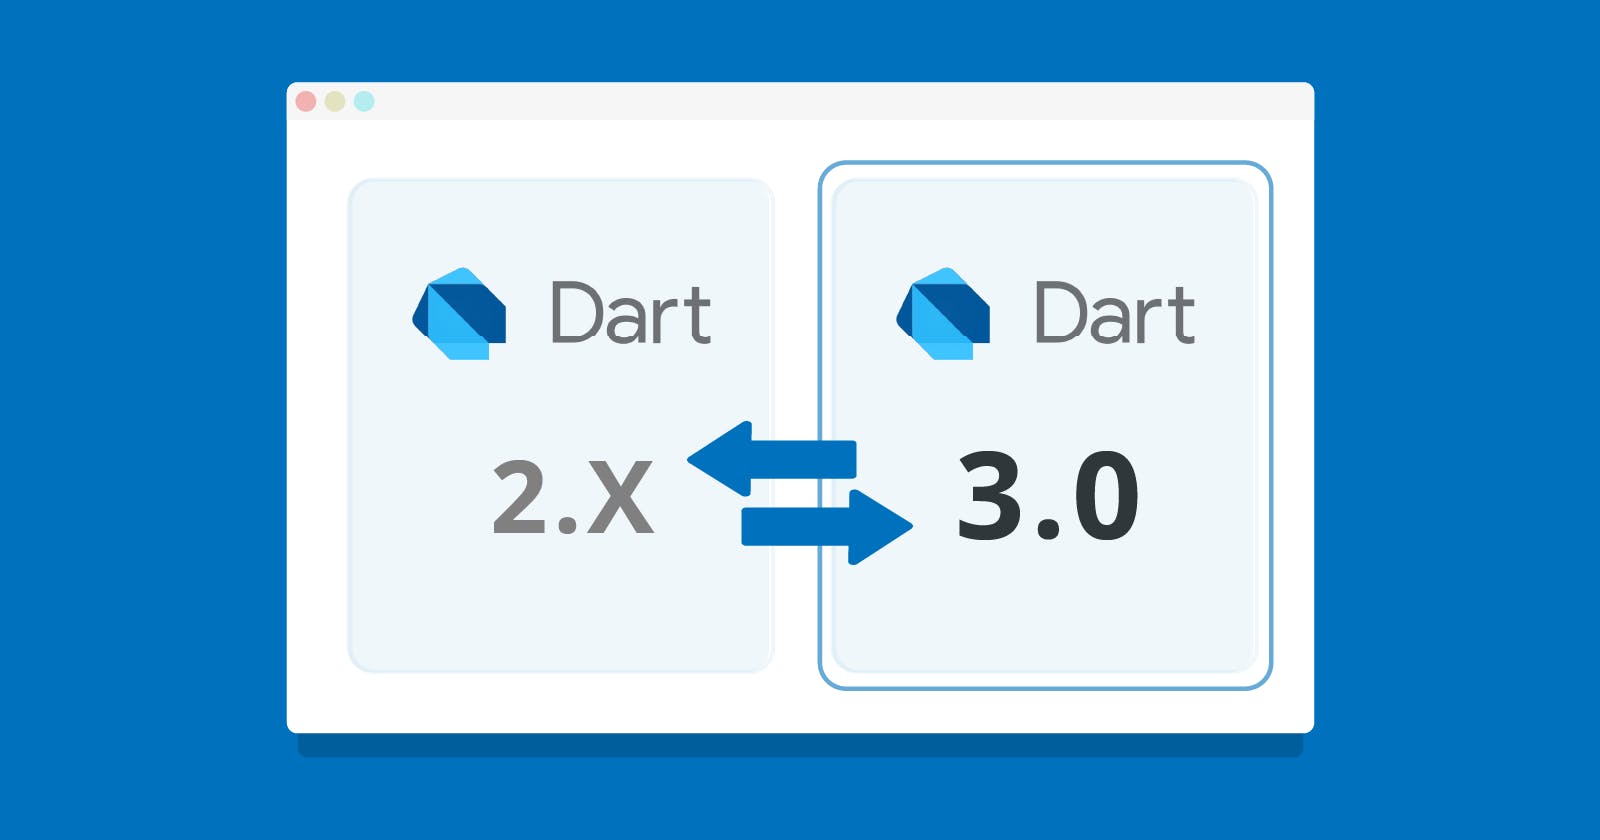 Being able to work with Dart 3